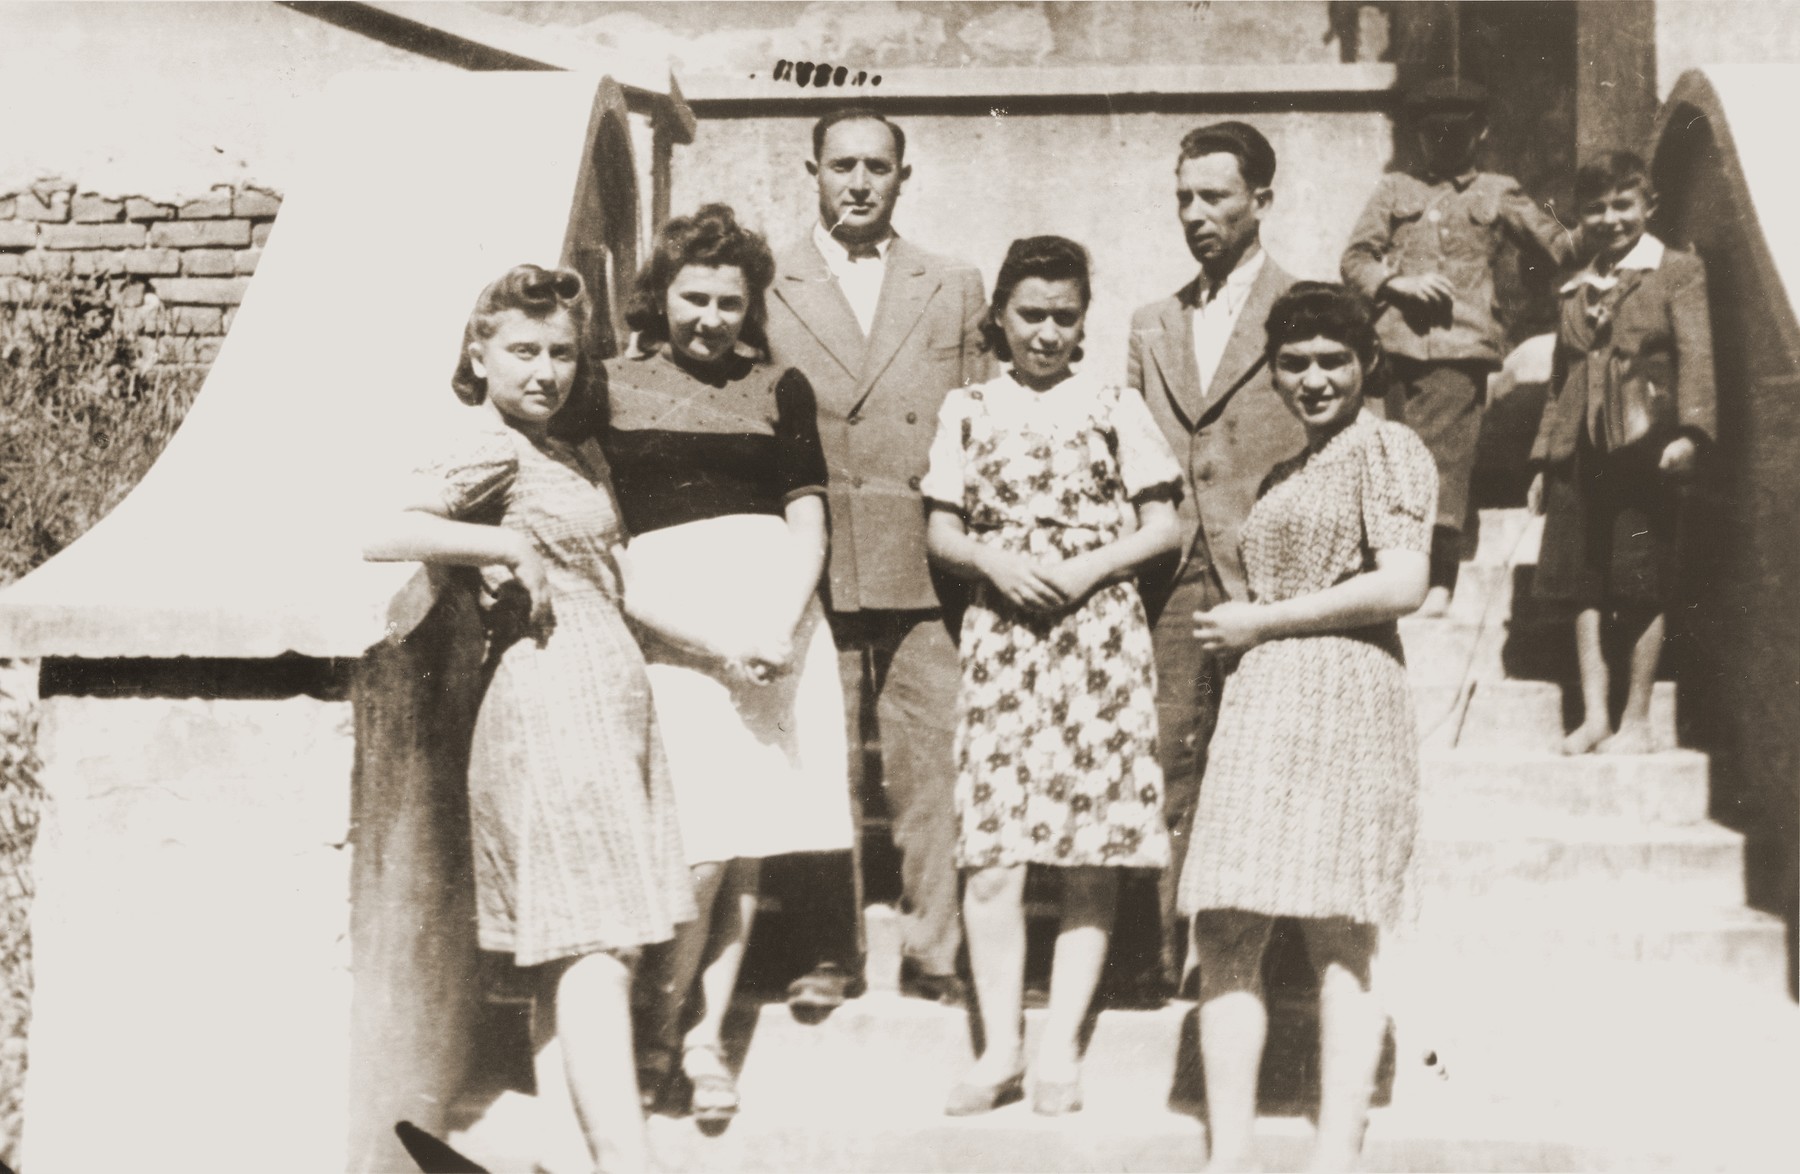 Group portrait of young Jewish DPs on the steps of a building in Lublin.

Pictured from left to right are: Rosa Lerner (Friedrich), Fryda Israelovitz (Bukar), unknown, Ms. Metches, Munio Kaczer (Kaiser), and Eugenia (Hochberg) Lanceter.